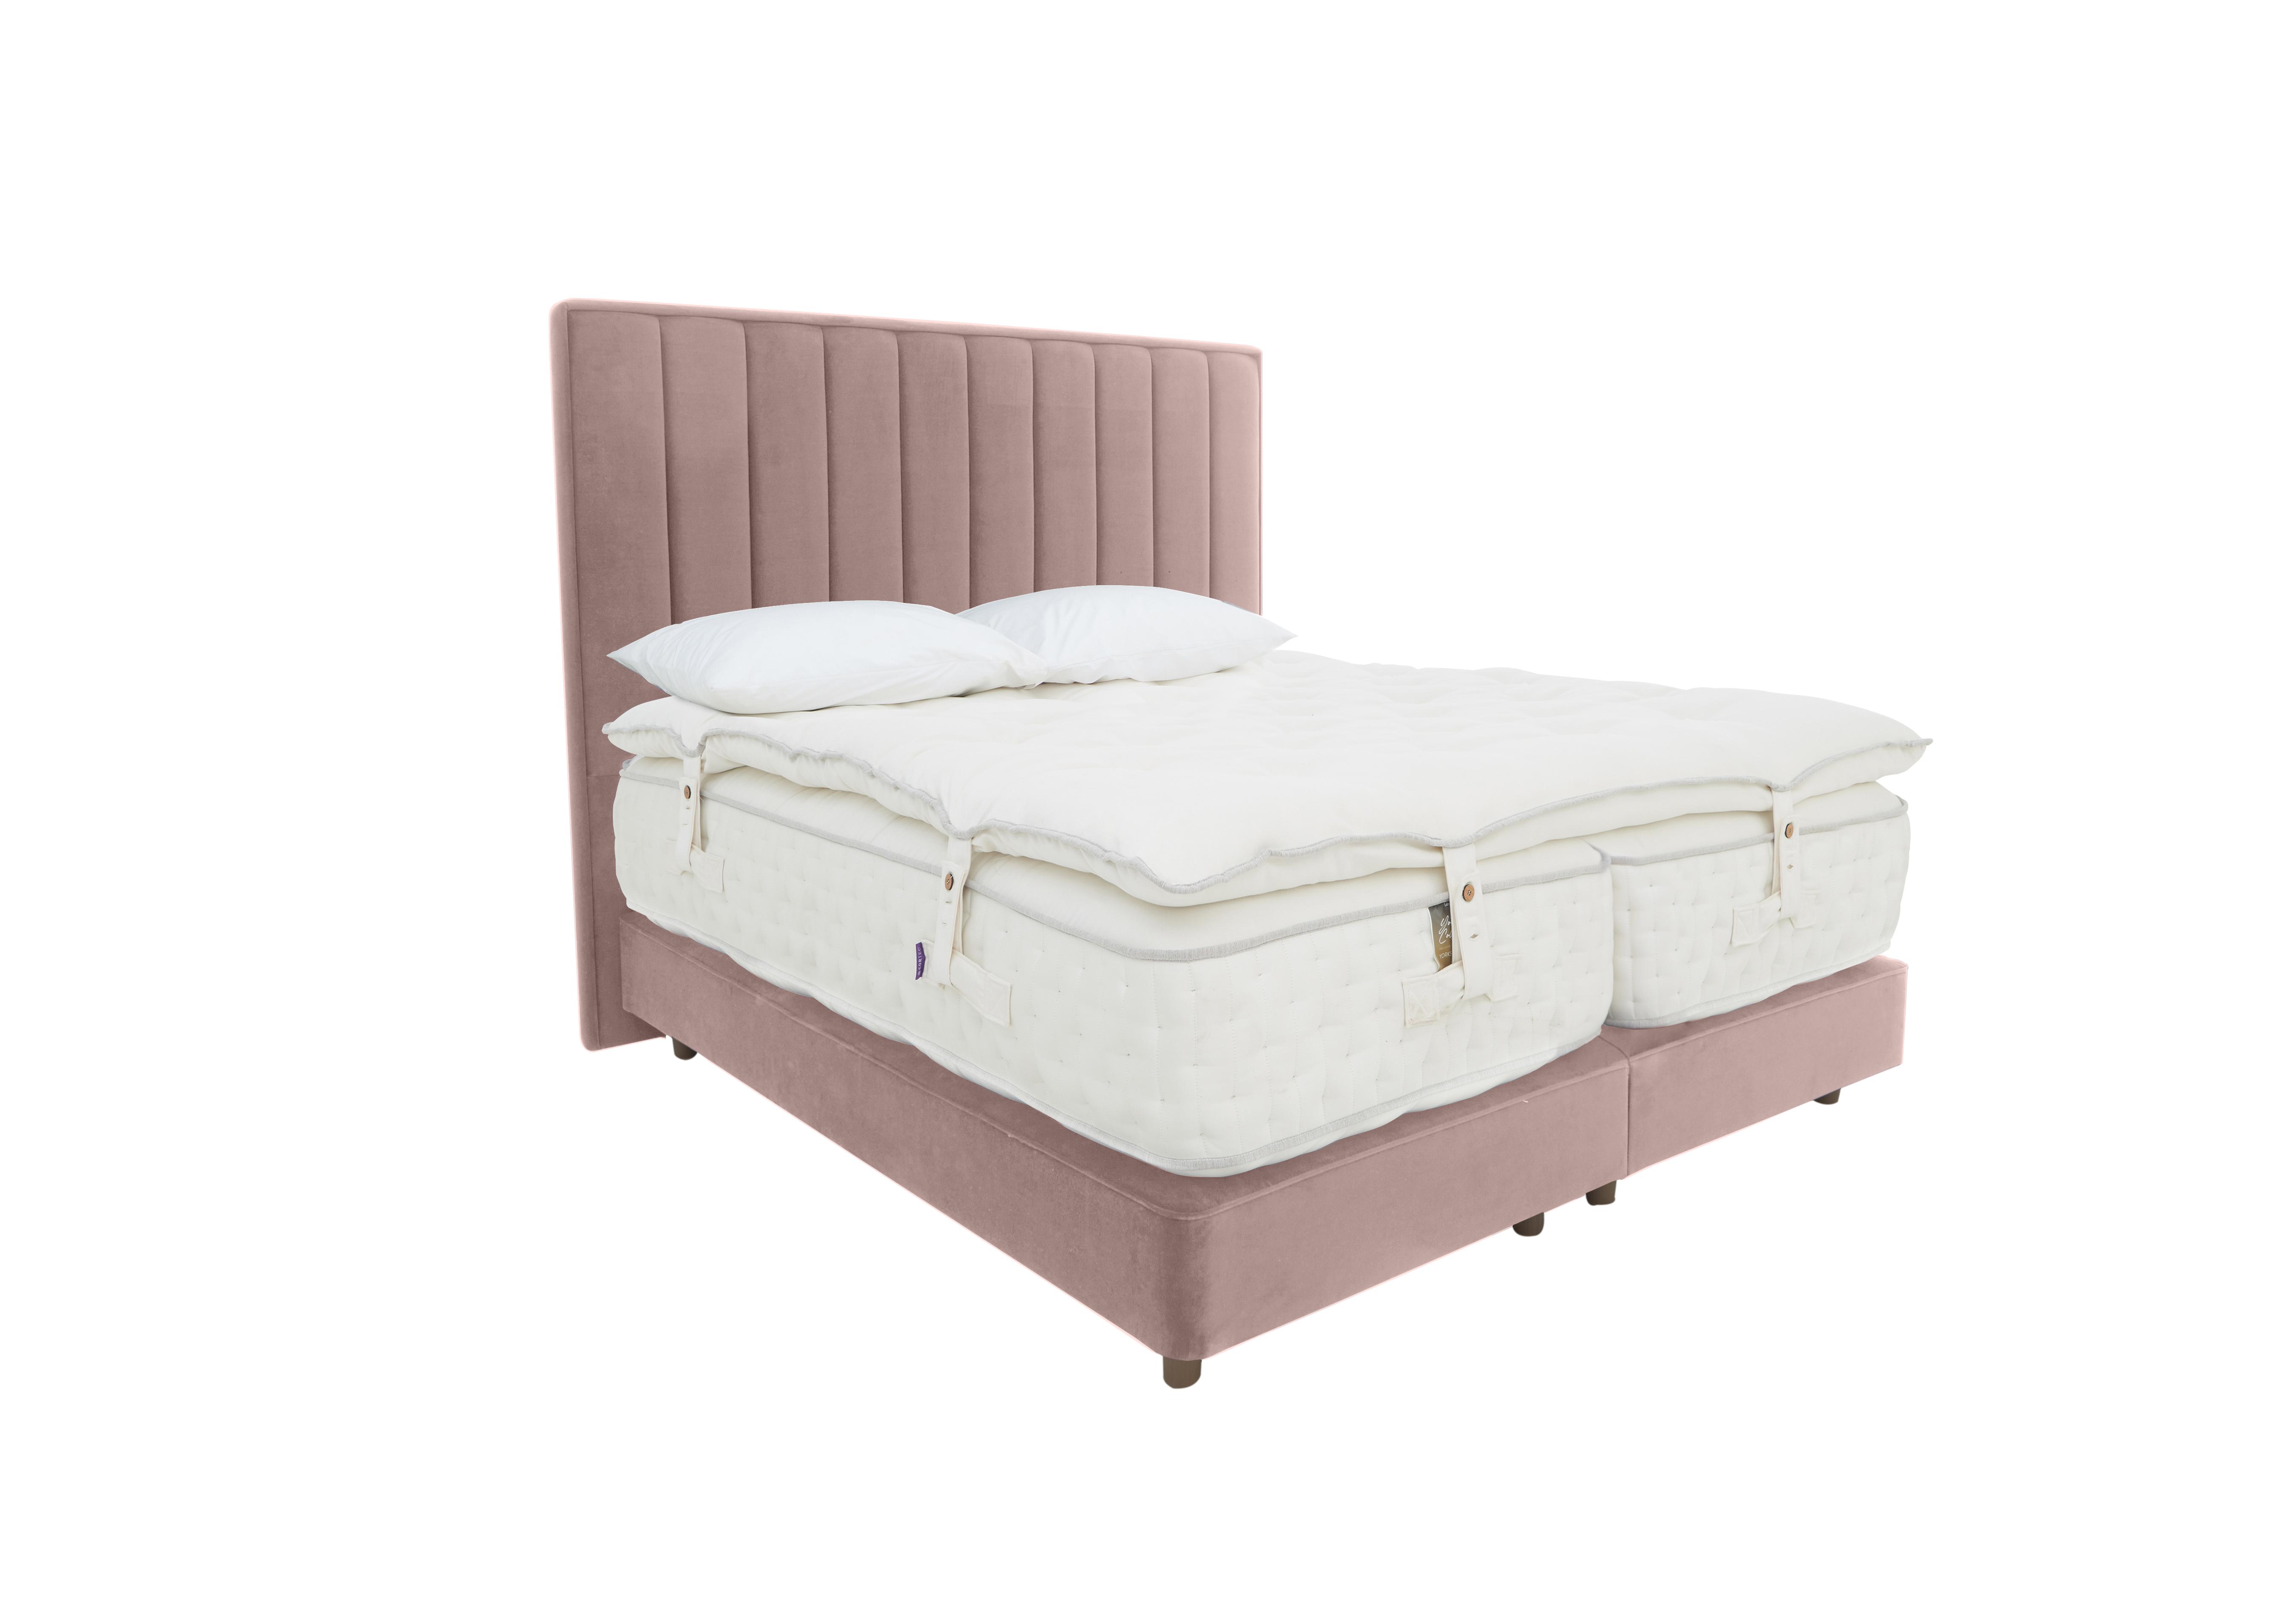 Yorkshire 40K Shallow Divan Set with Zip and Link Mattress with Mattress Topper in Seven Blossom on Furniture Village